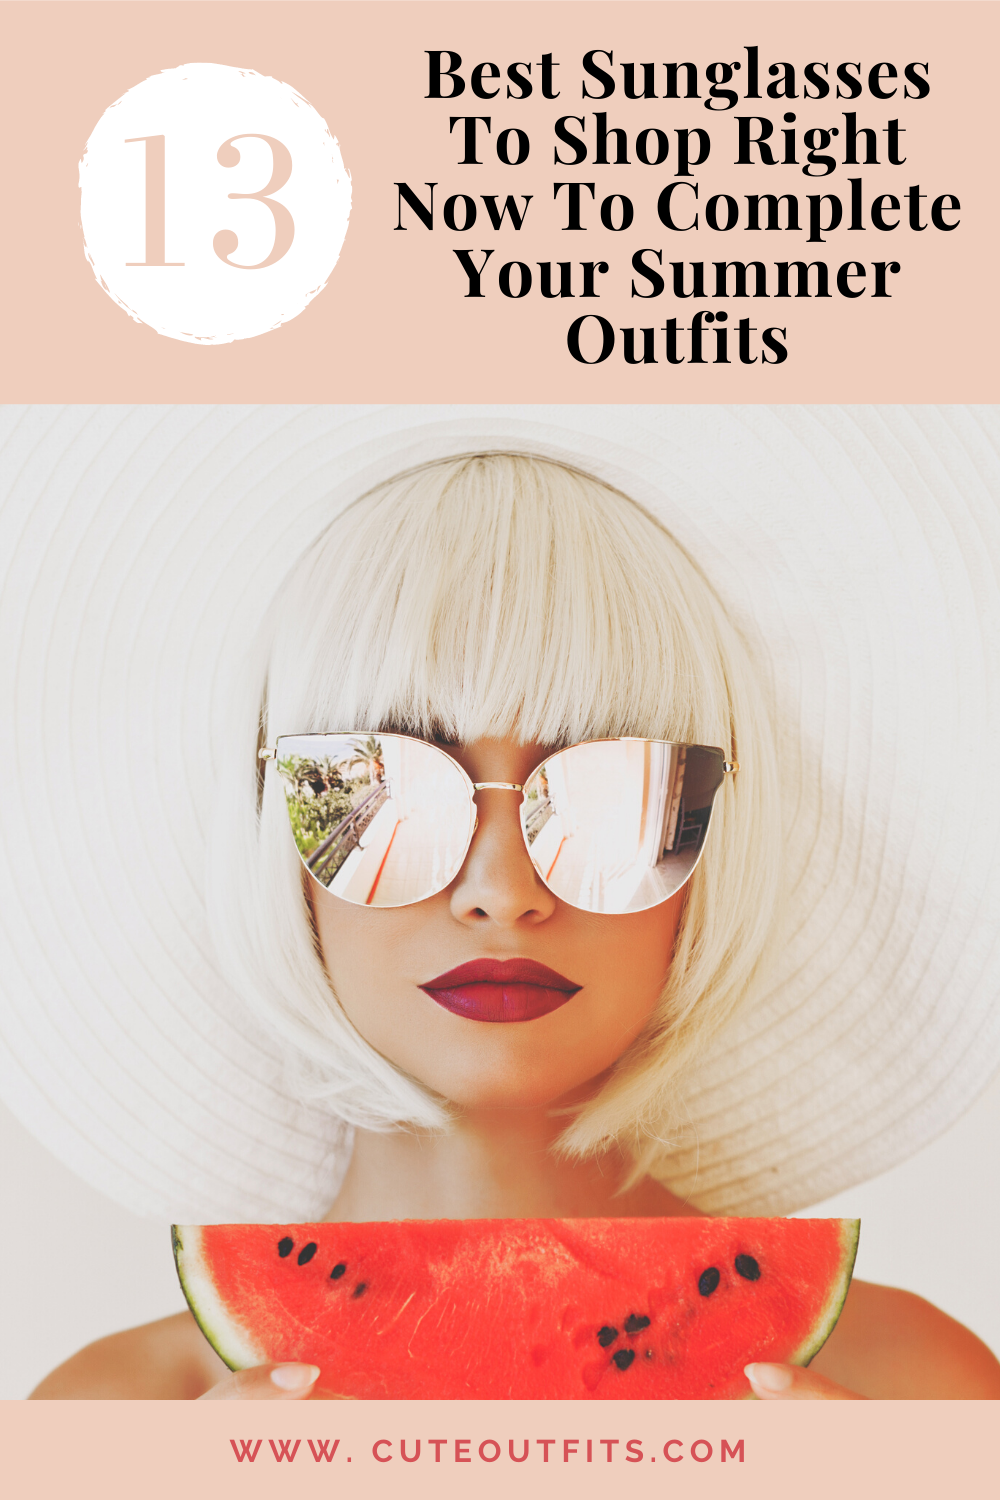 placard | 13 Best Sunglasses To Shop Right Now To Complete Your Summer Outfits